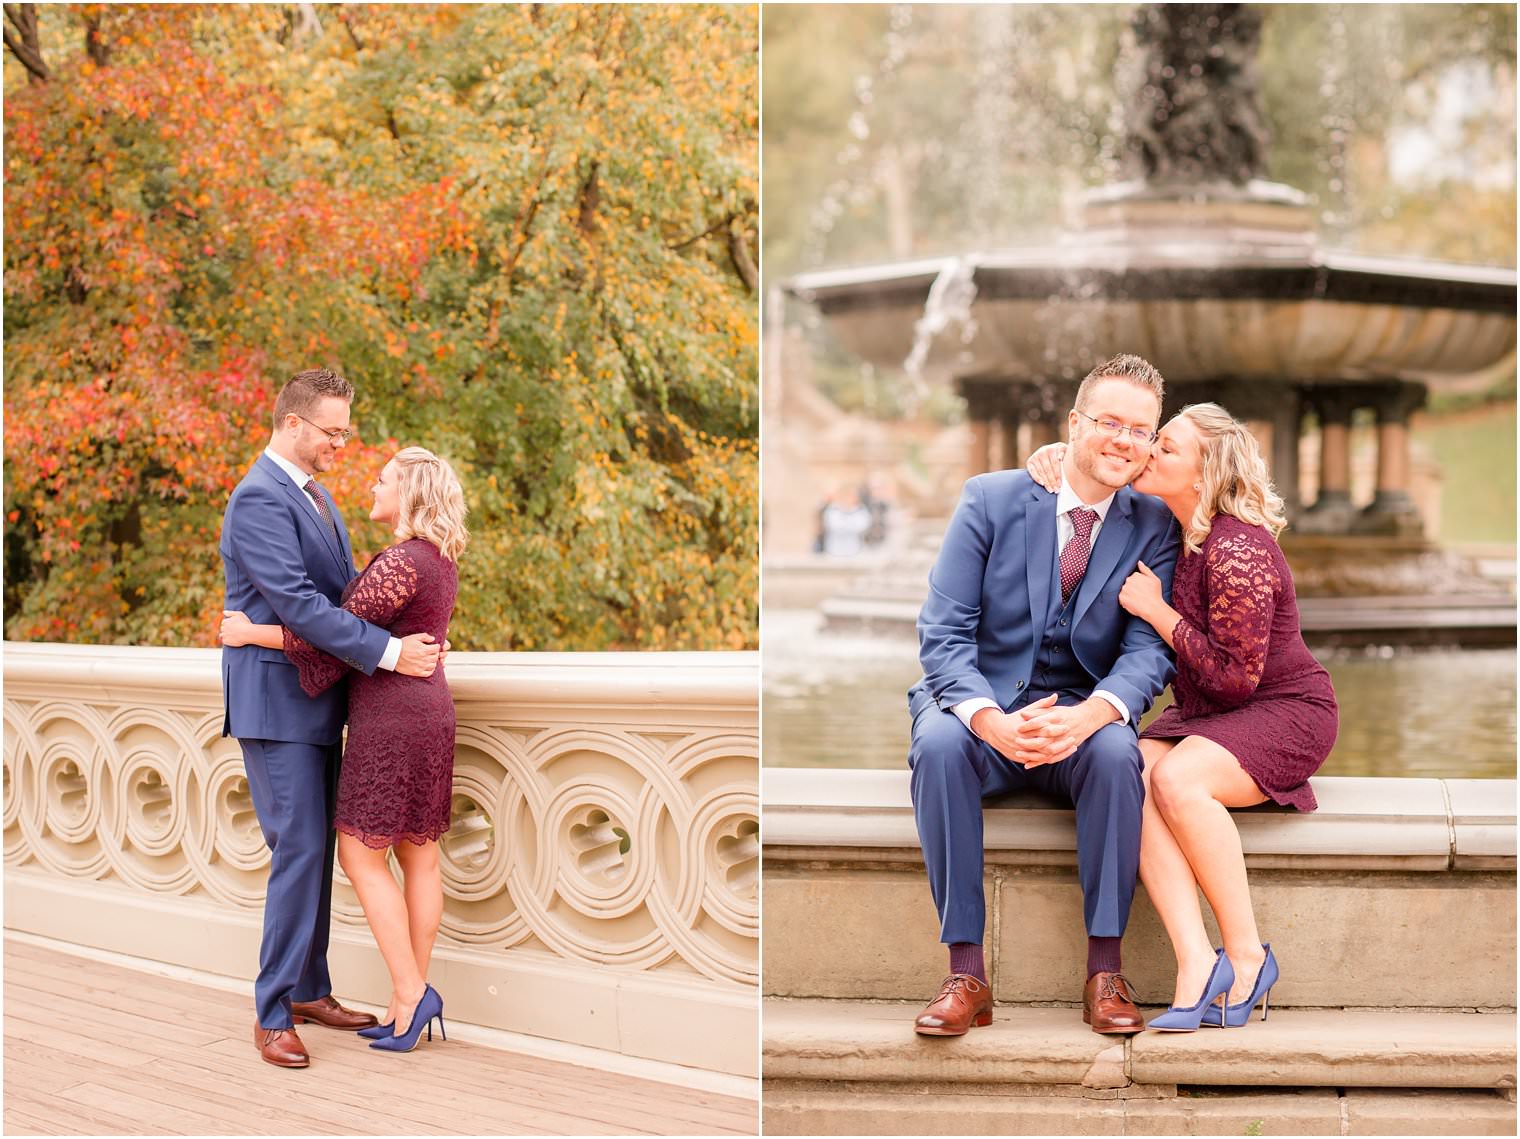 cute moment between bride and groom during engagement photos in central park